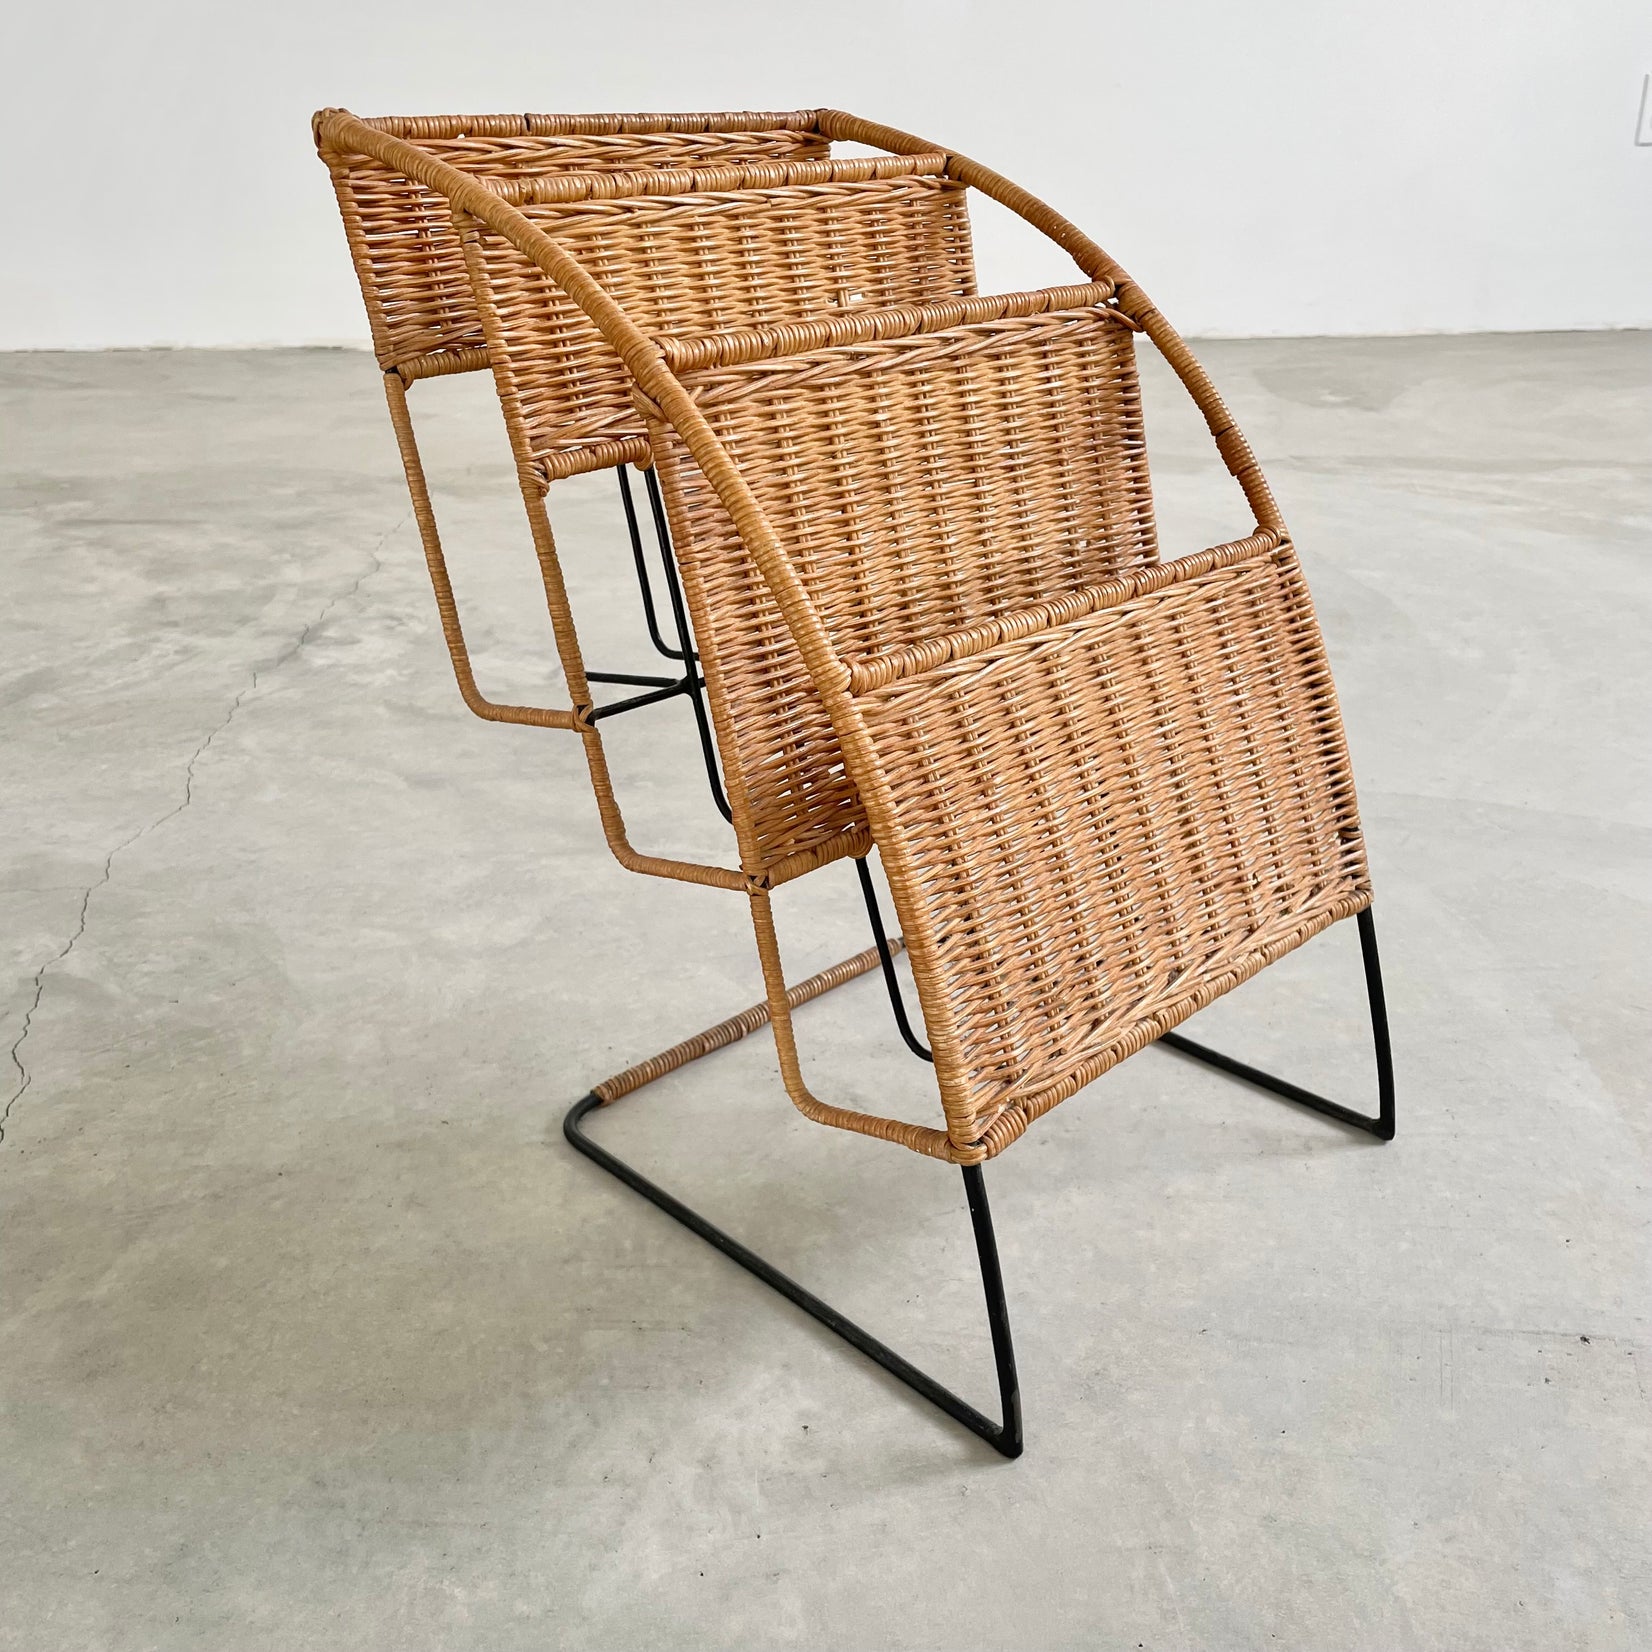 Rattan and Iron Magazine Rack attributed to Jacques Adnet, 1950s France